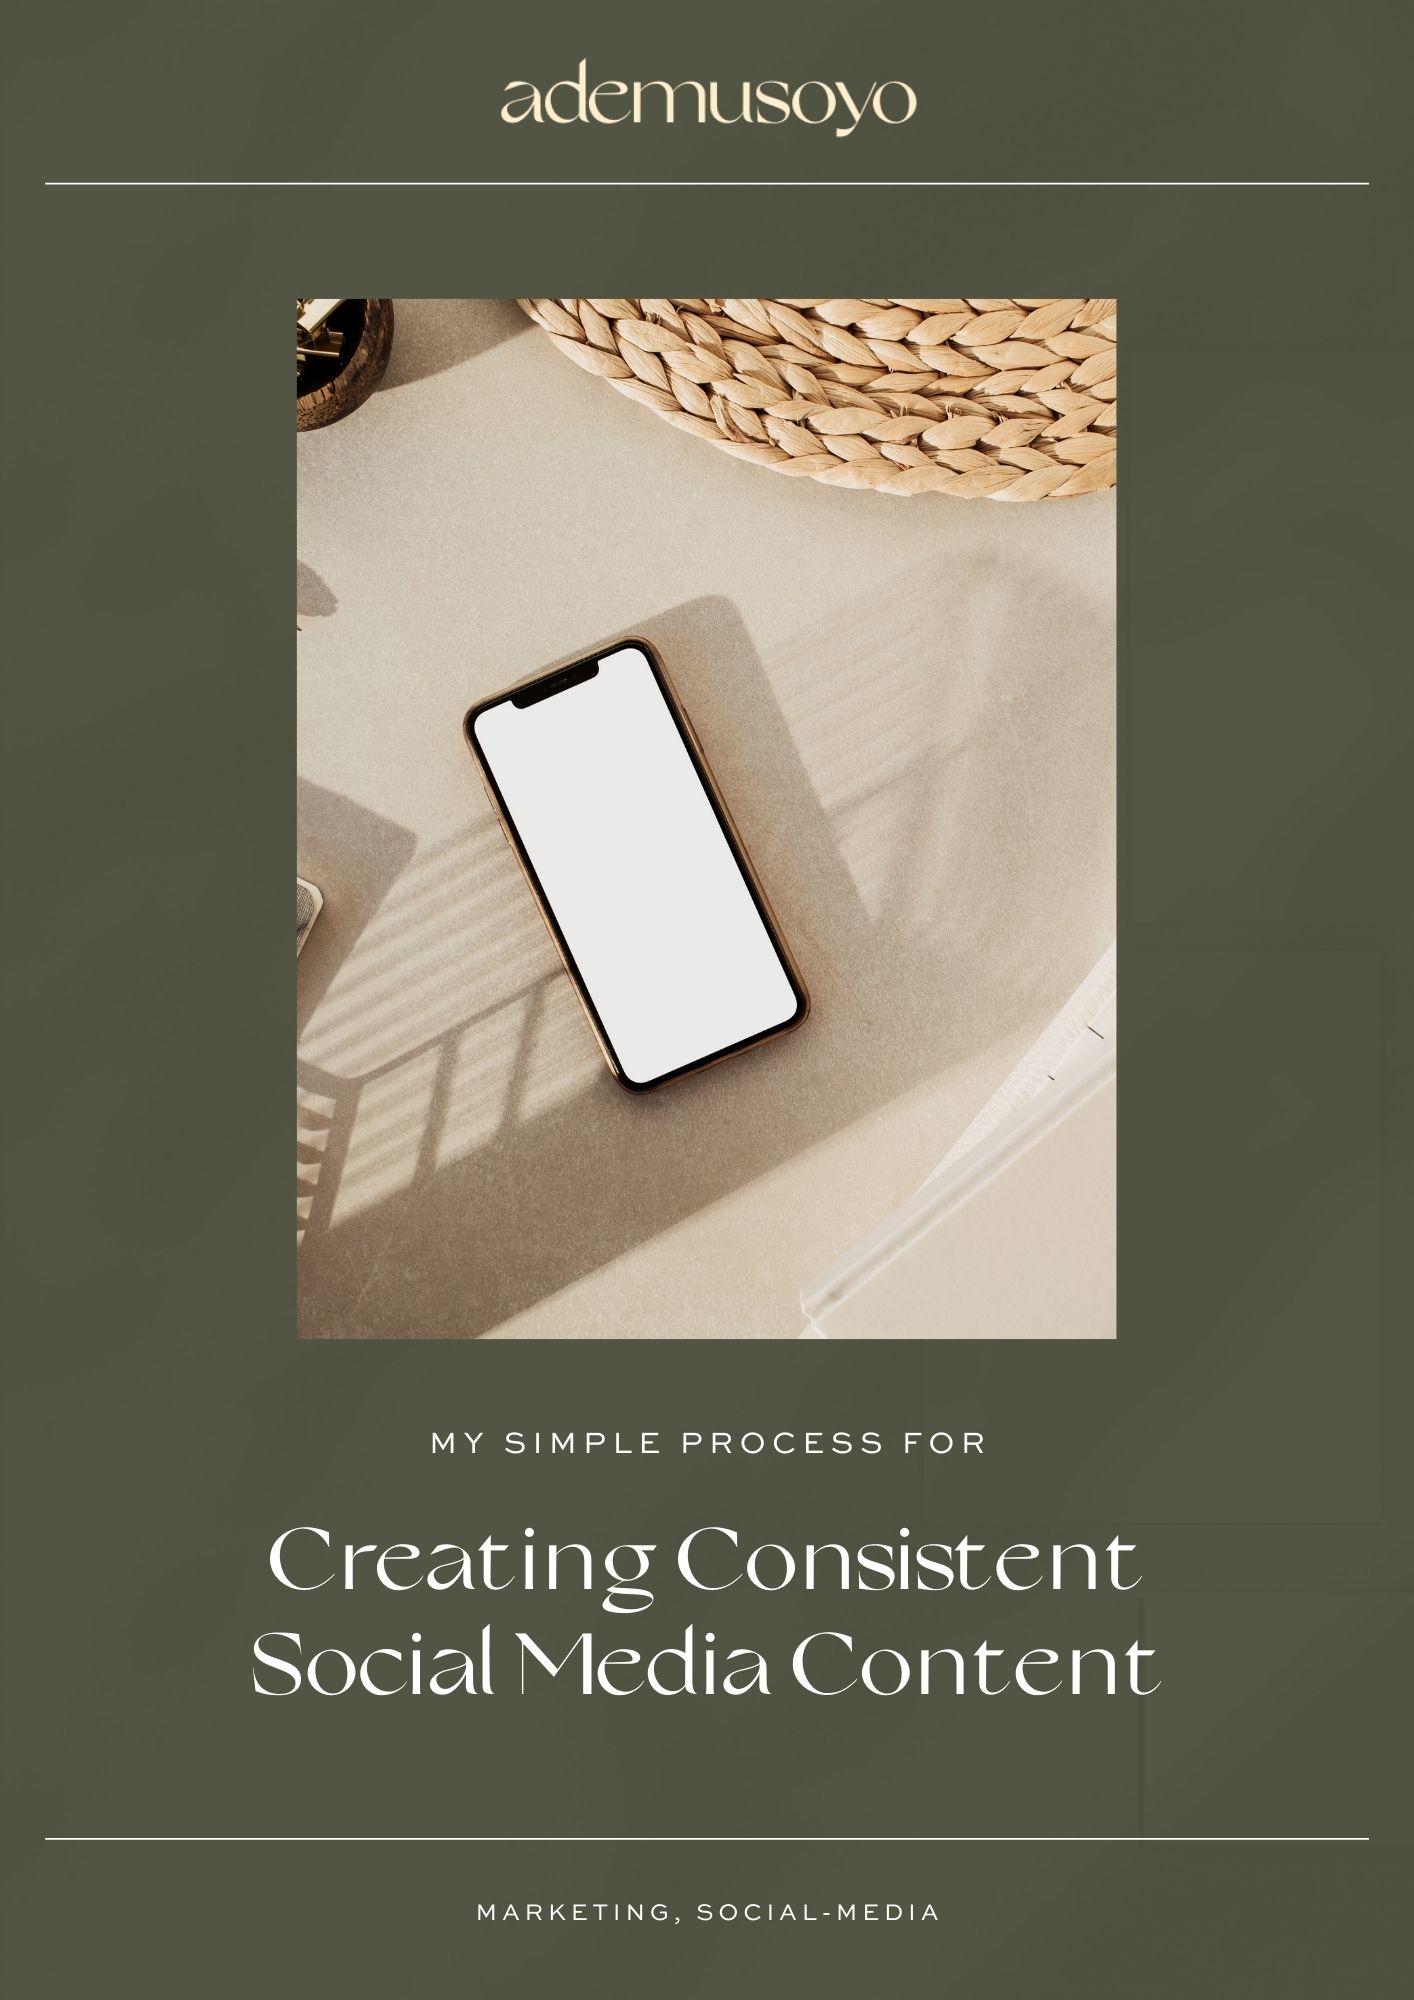 My Simple Process For Creating Consistent Social Media Content